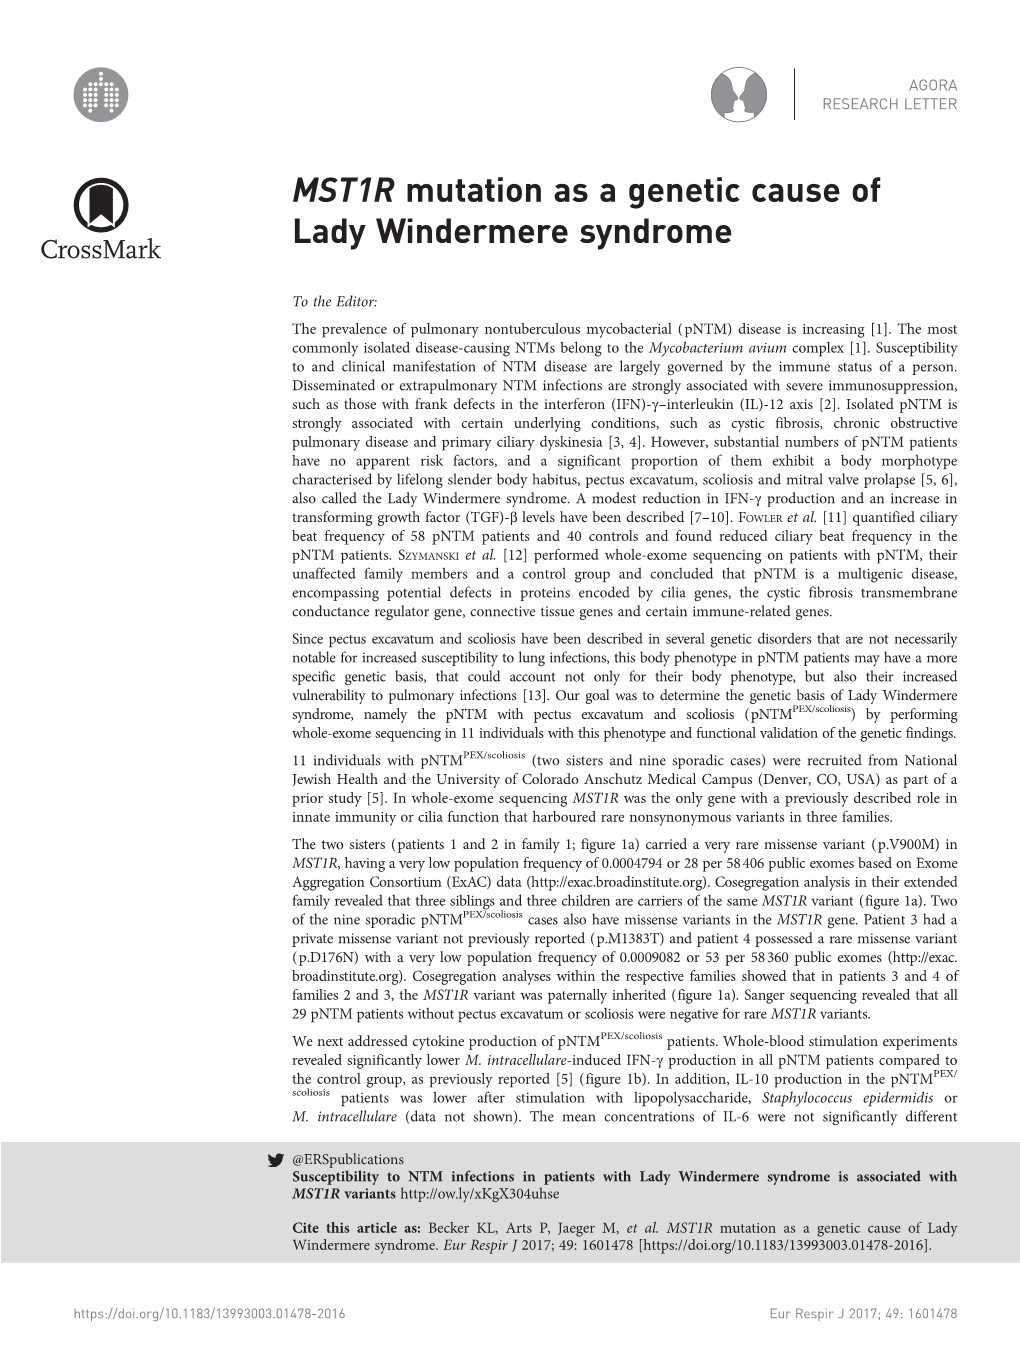 MST1R Mutation As a Genetic Cause of Lady Windermere Syndrome